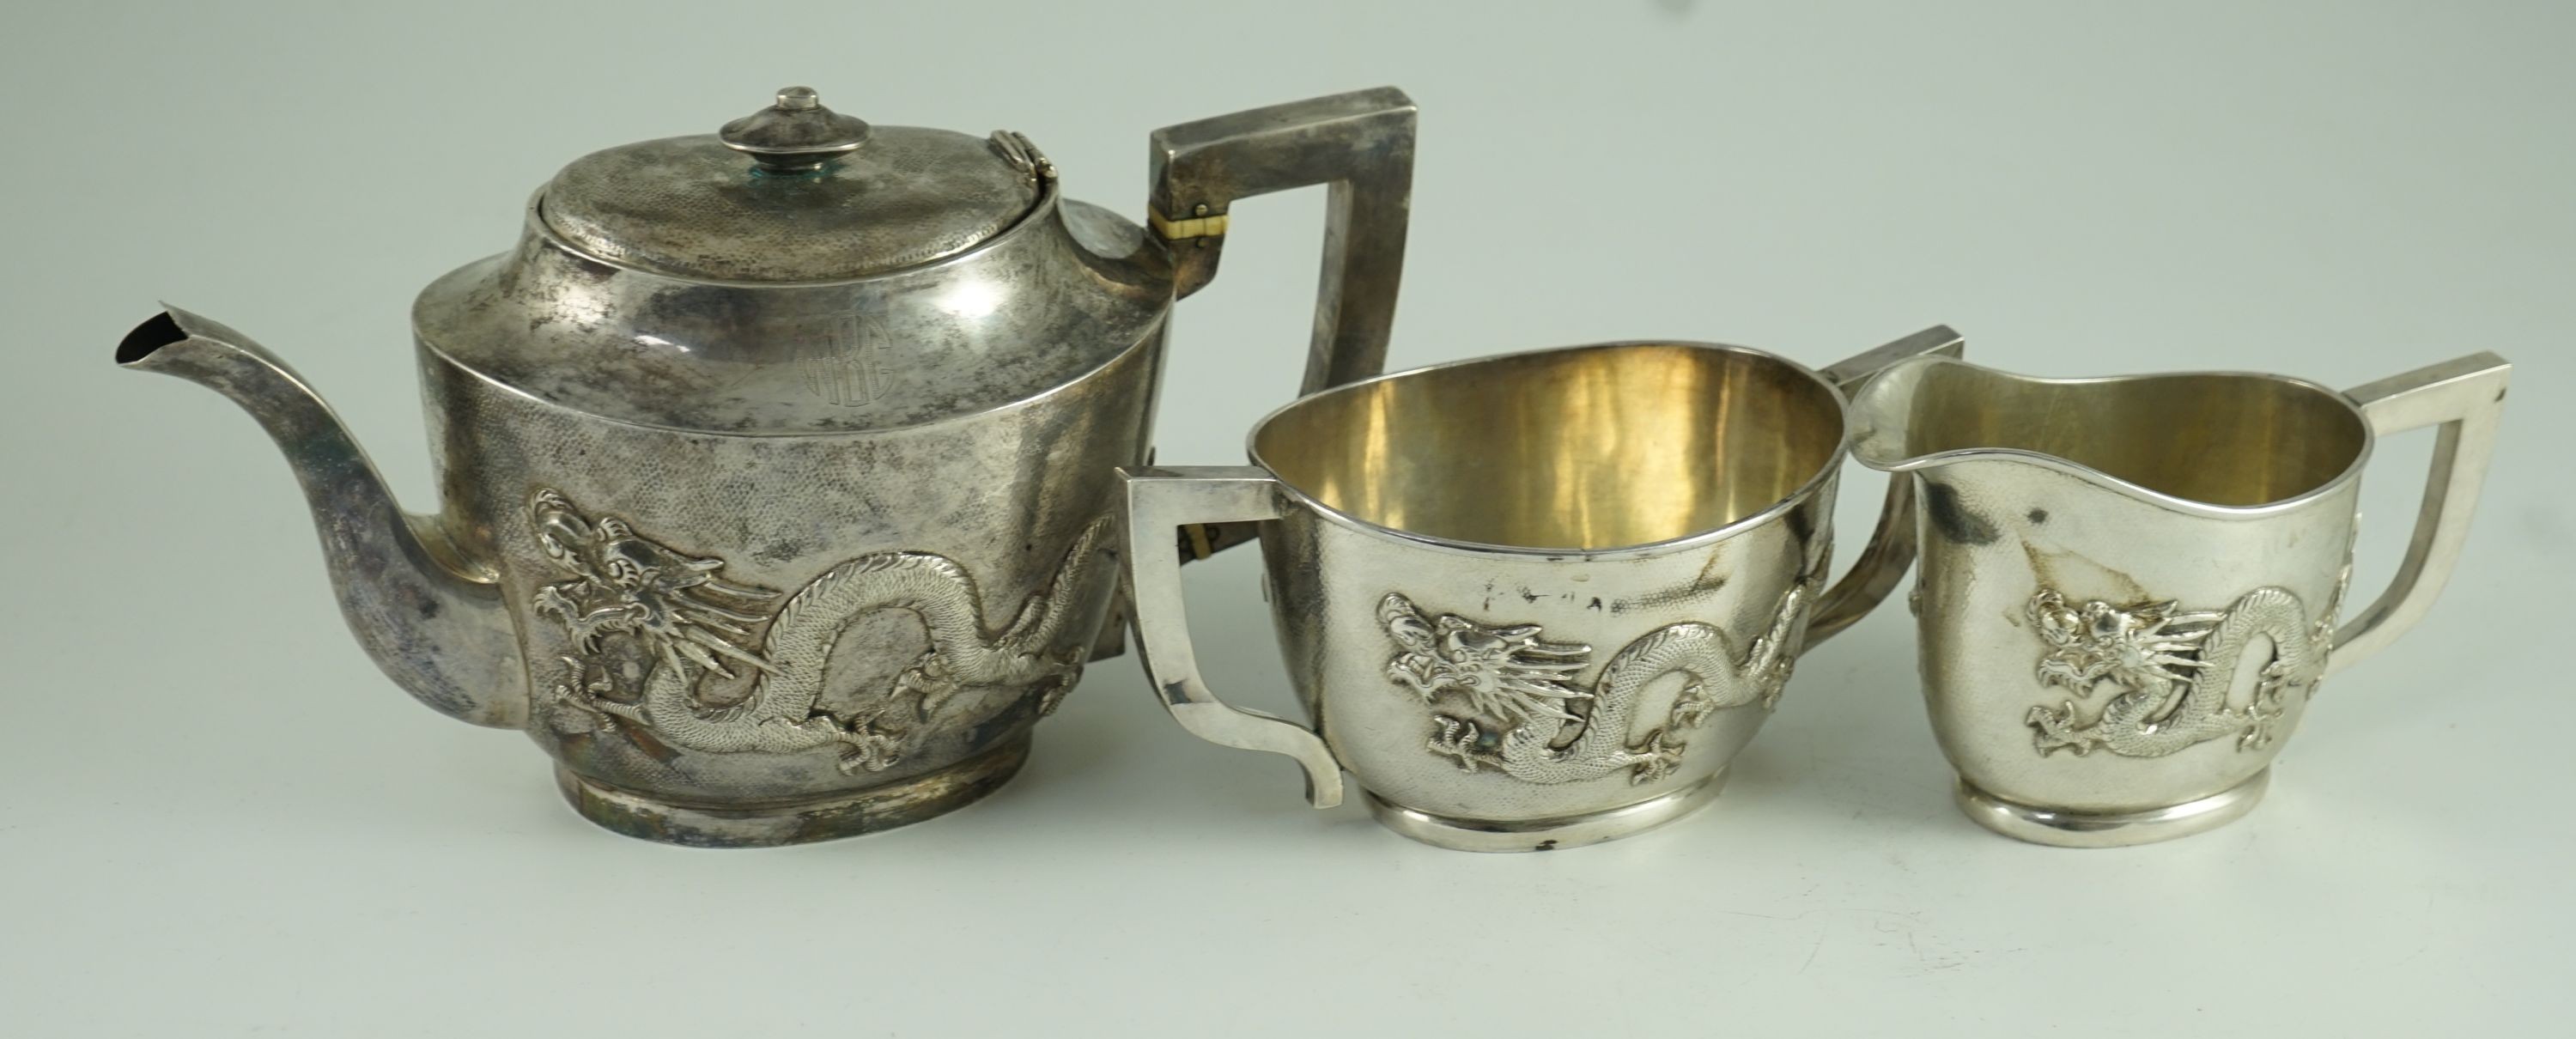 An early 20th century Chinese Export three piece silver tea set and matching silver inlaid hardwood two handled tea tray, by Luen Hing?